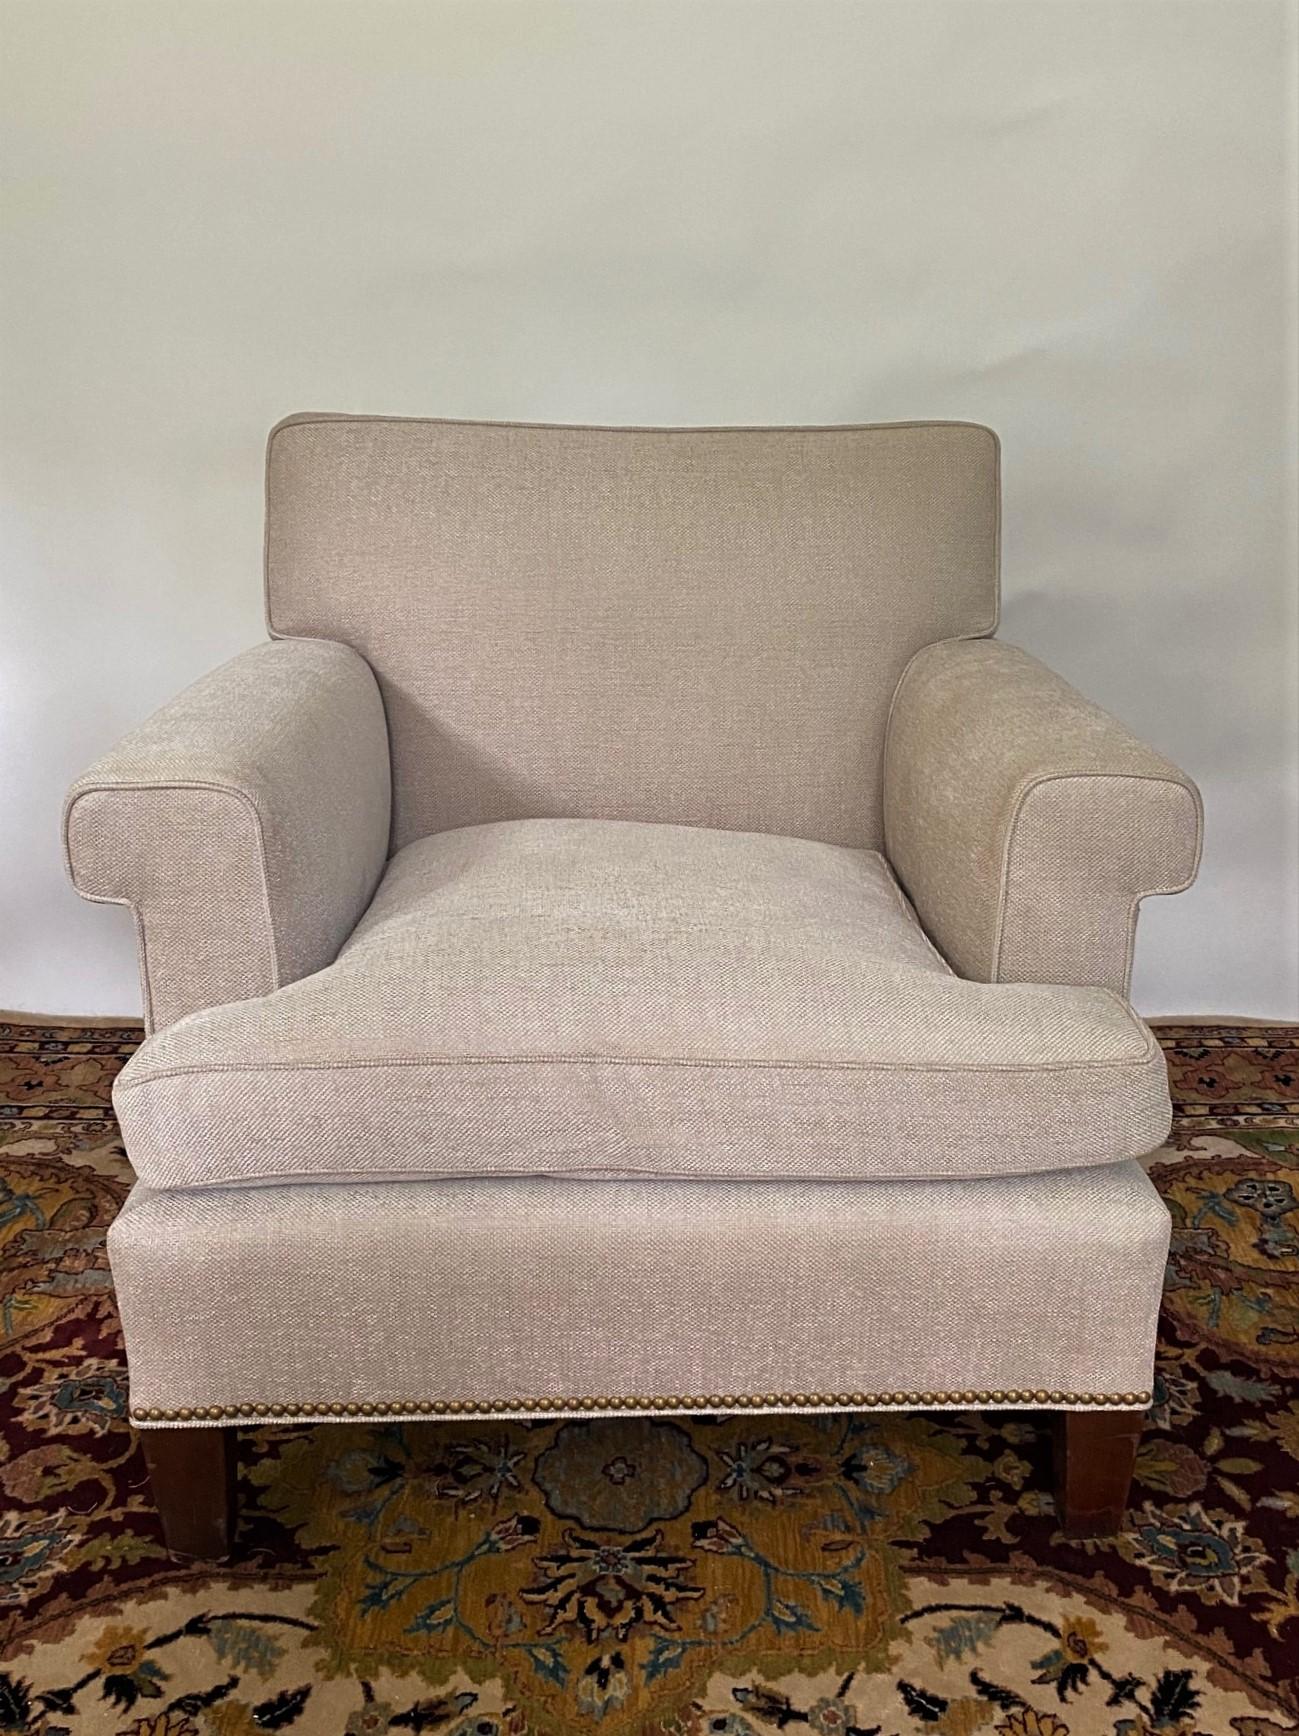 This New Lawson style lounge chair is a comfortable and classic piece of furniture that embodies a timeless design. It features a straight back and square arms, offering a clean and streamlined silhouette that complements various interior